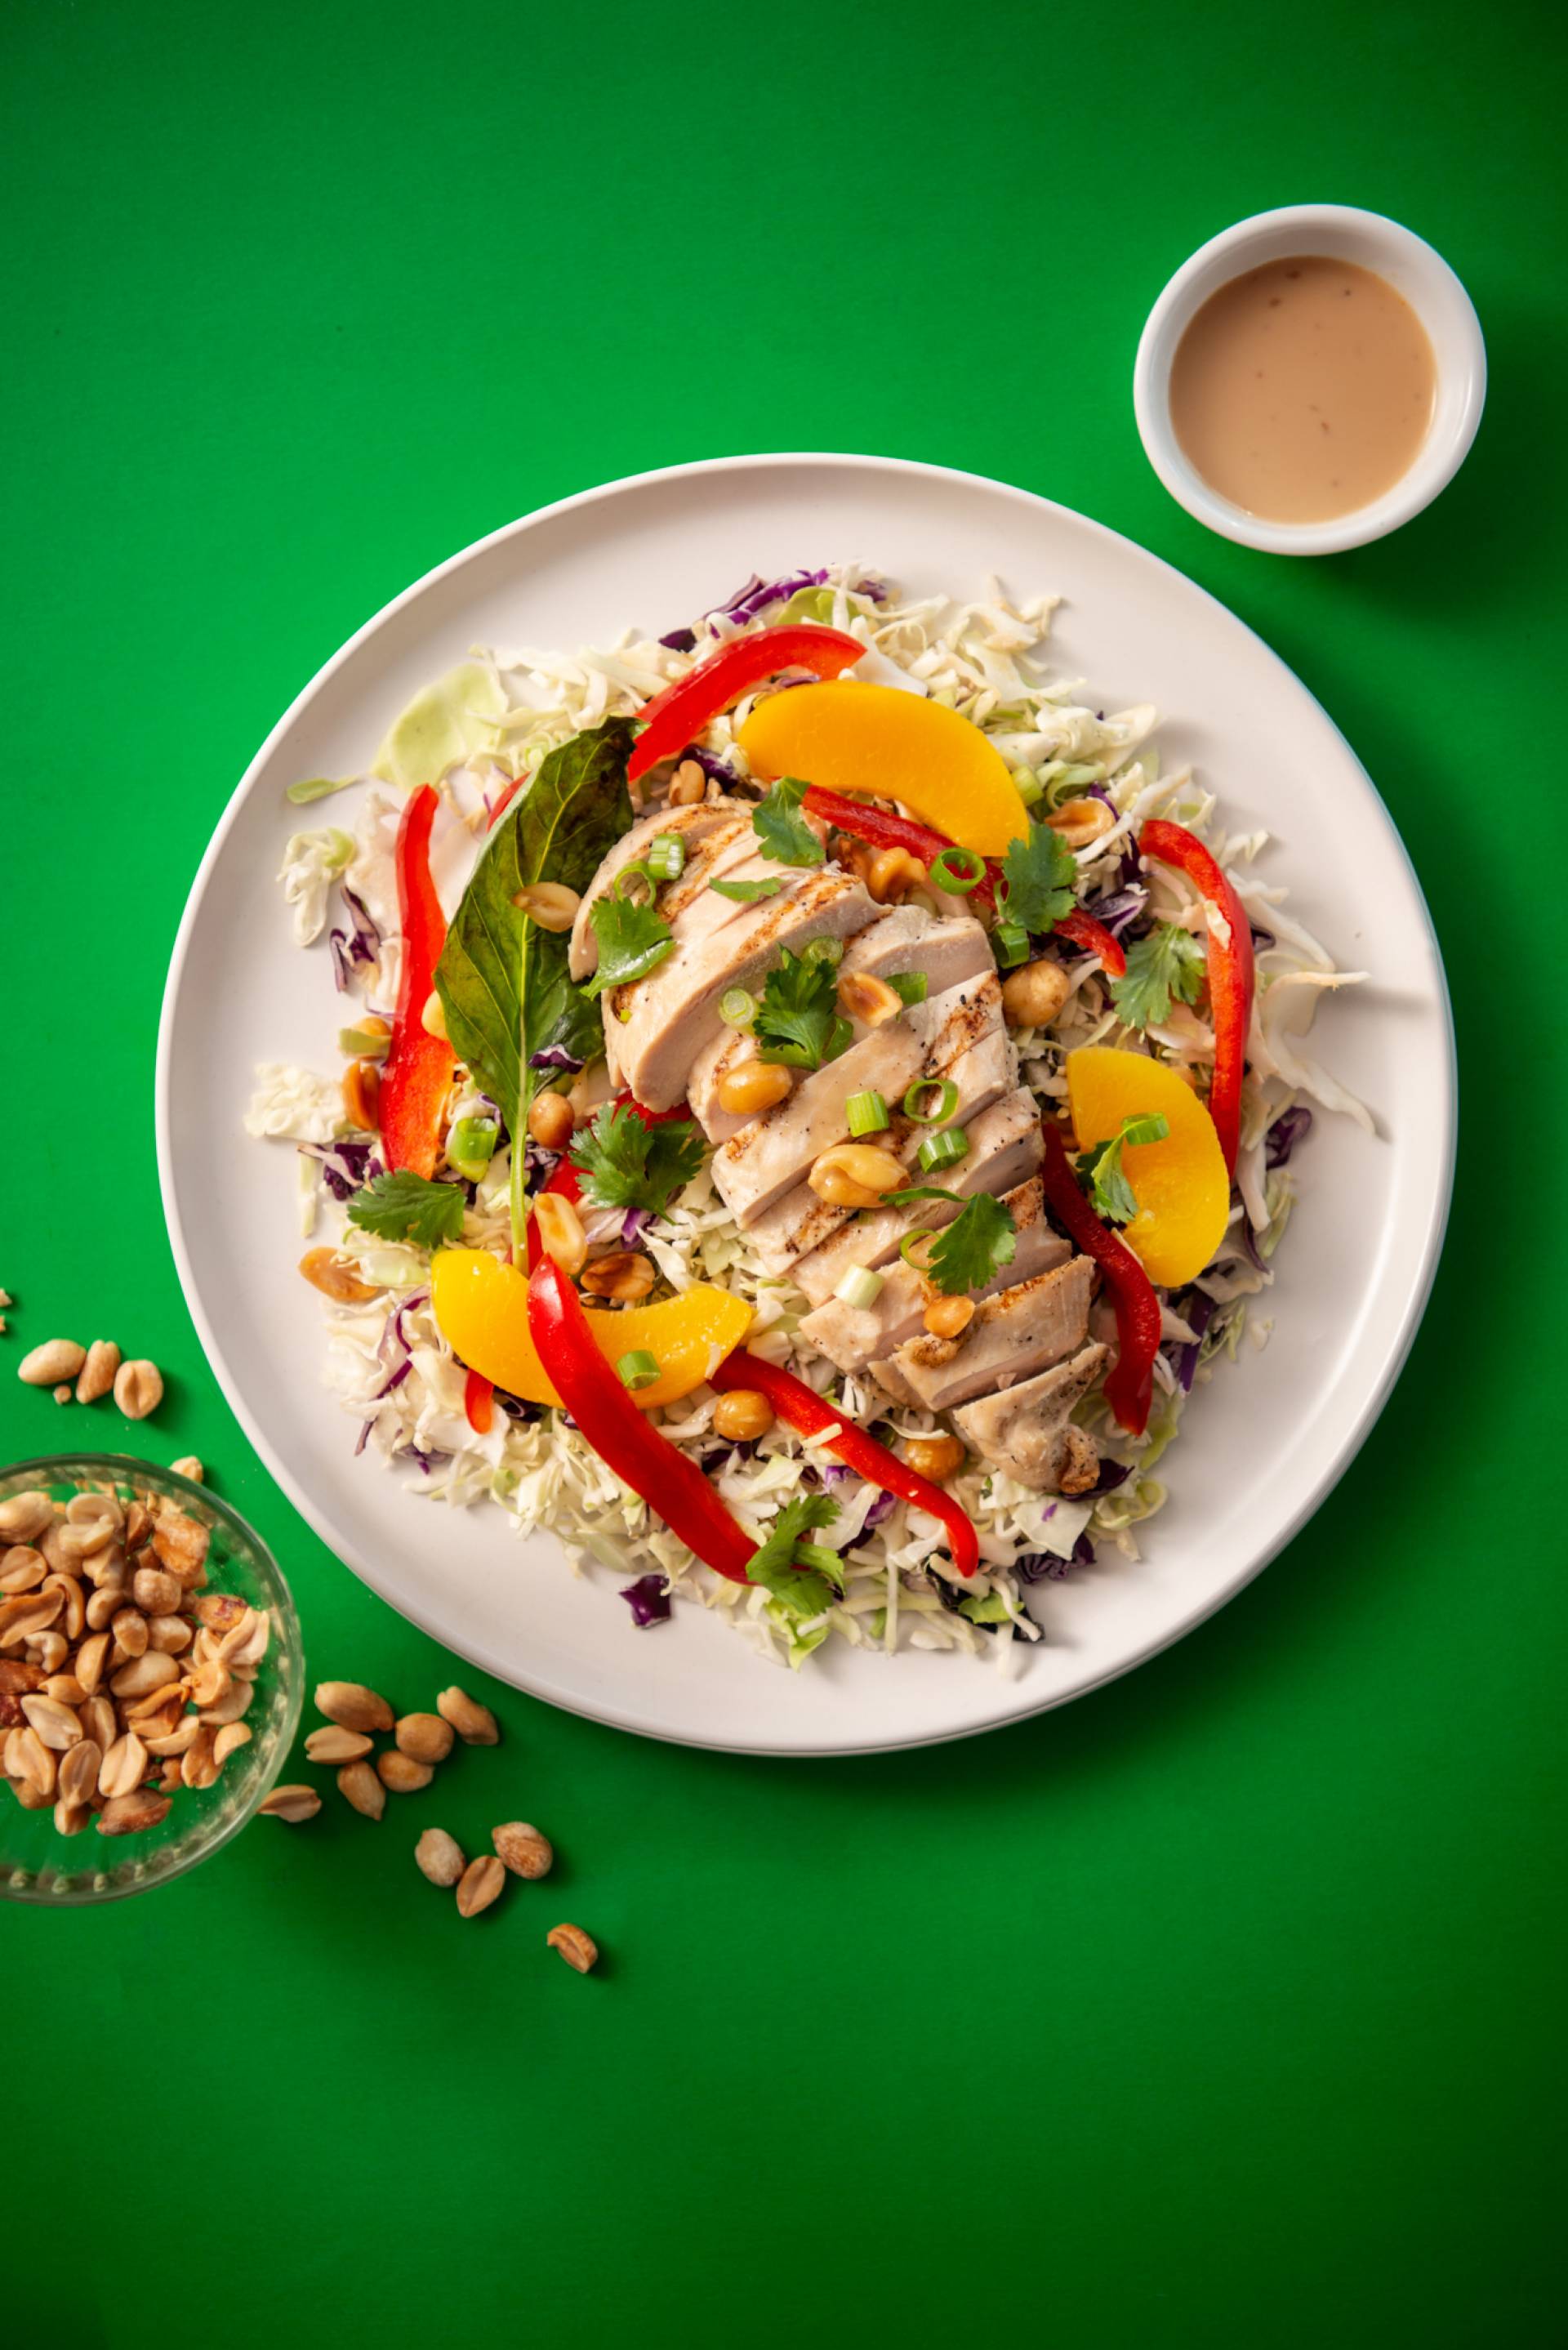 Crunchy Asian Slaw Chicken Salad with Ginger Peanut Miso Dressing